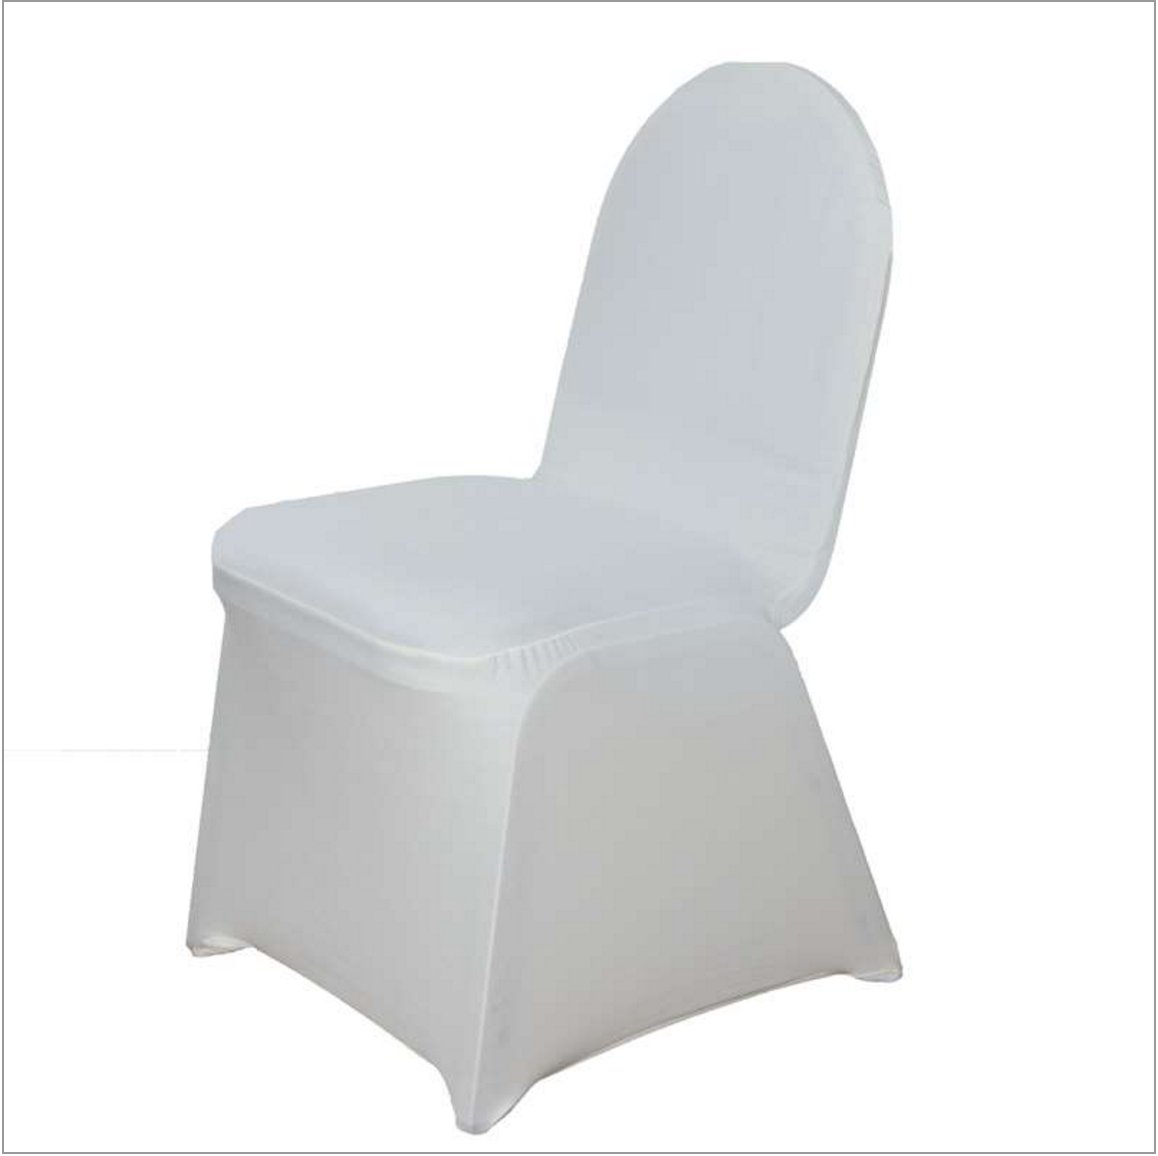 Beige / Ivory Form Fitting Stretch Fabric Full Chair Cover - PaperLanternStore.com - Paper Lanterns, Decor, Party Lights & More